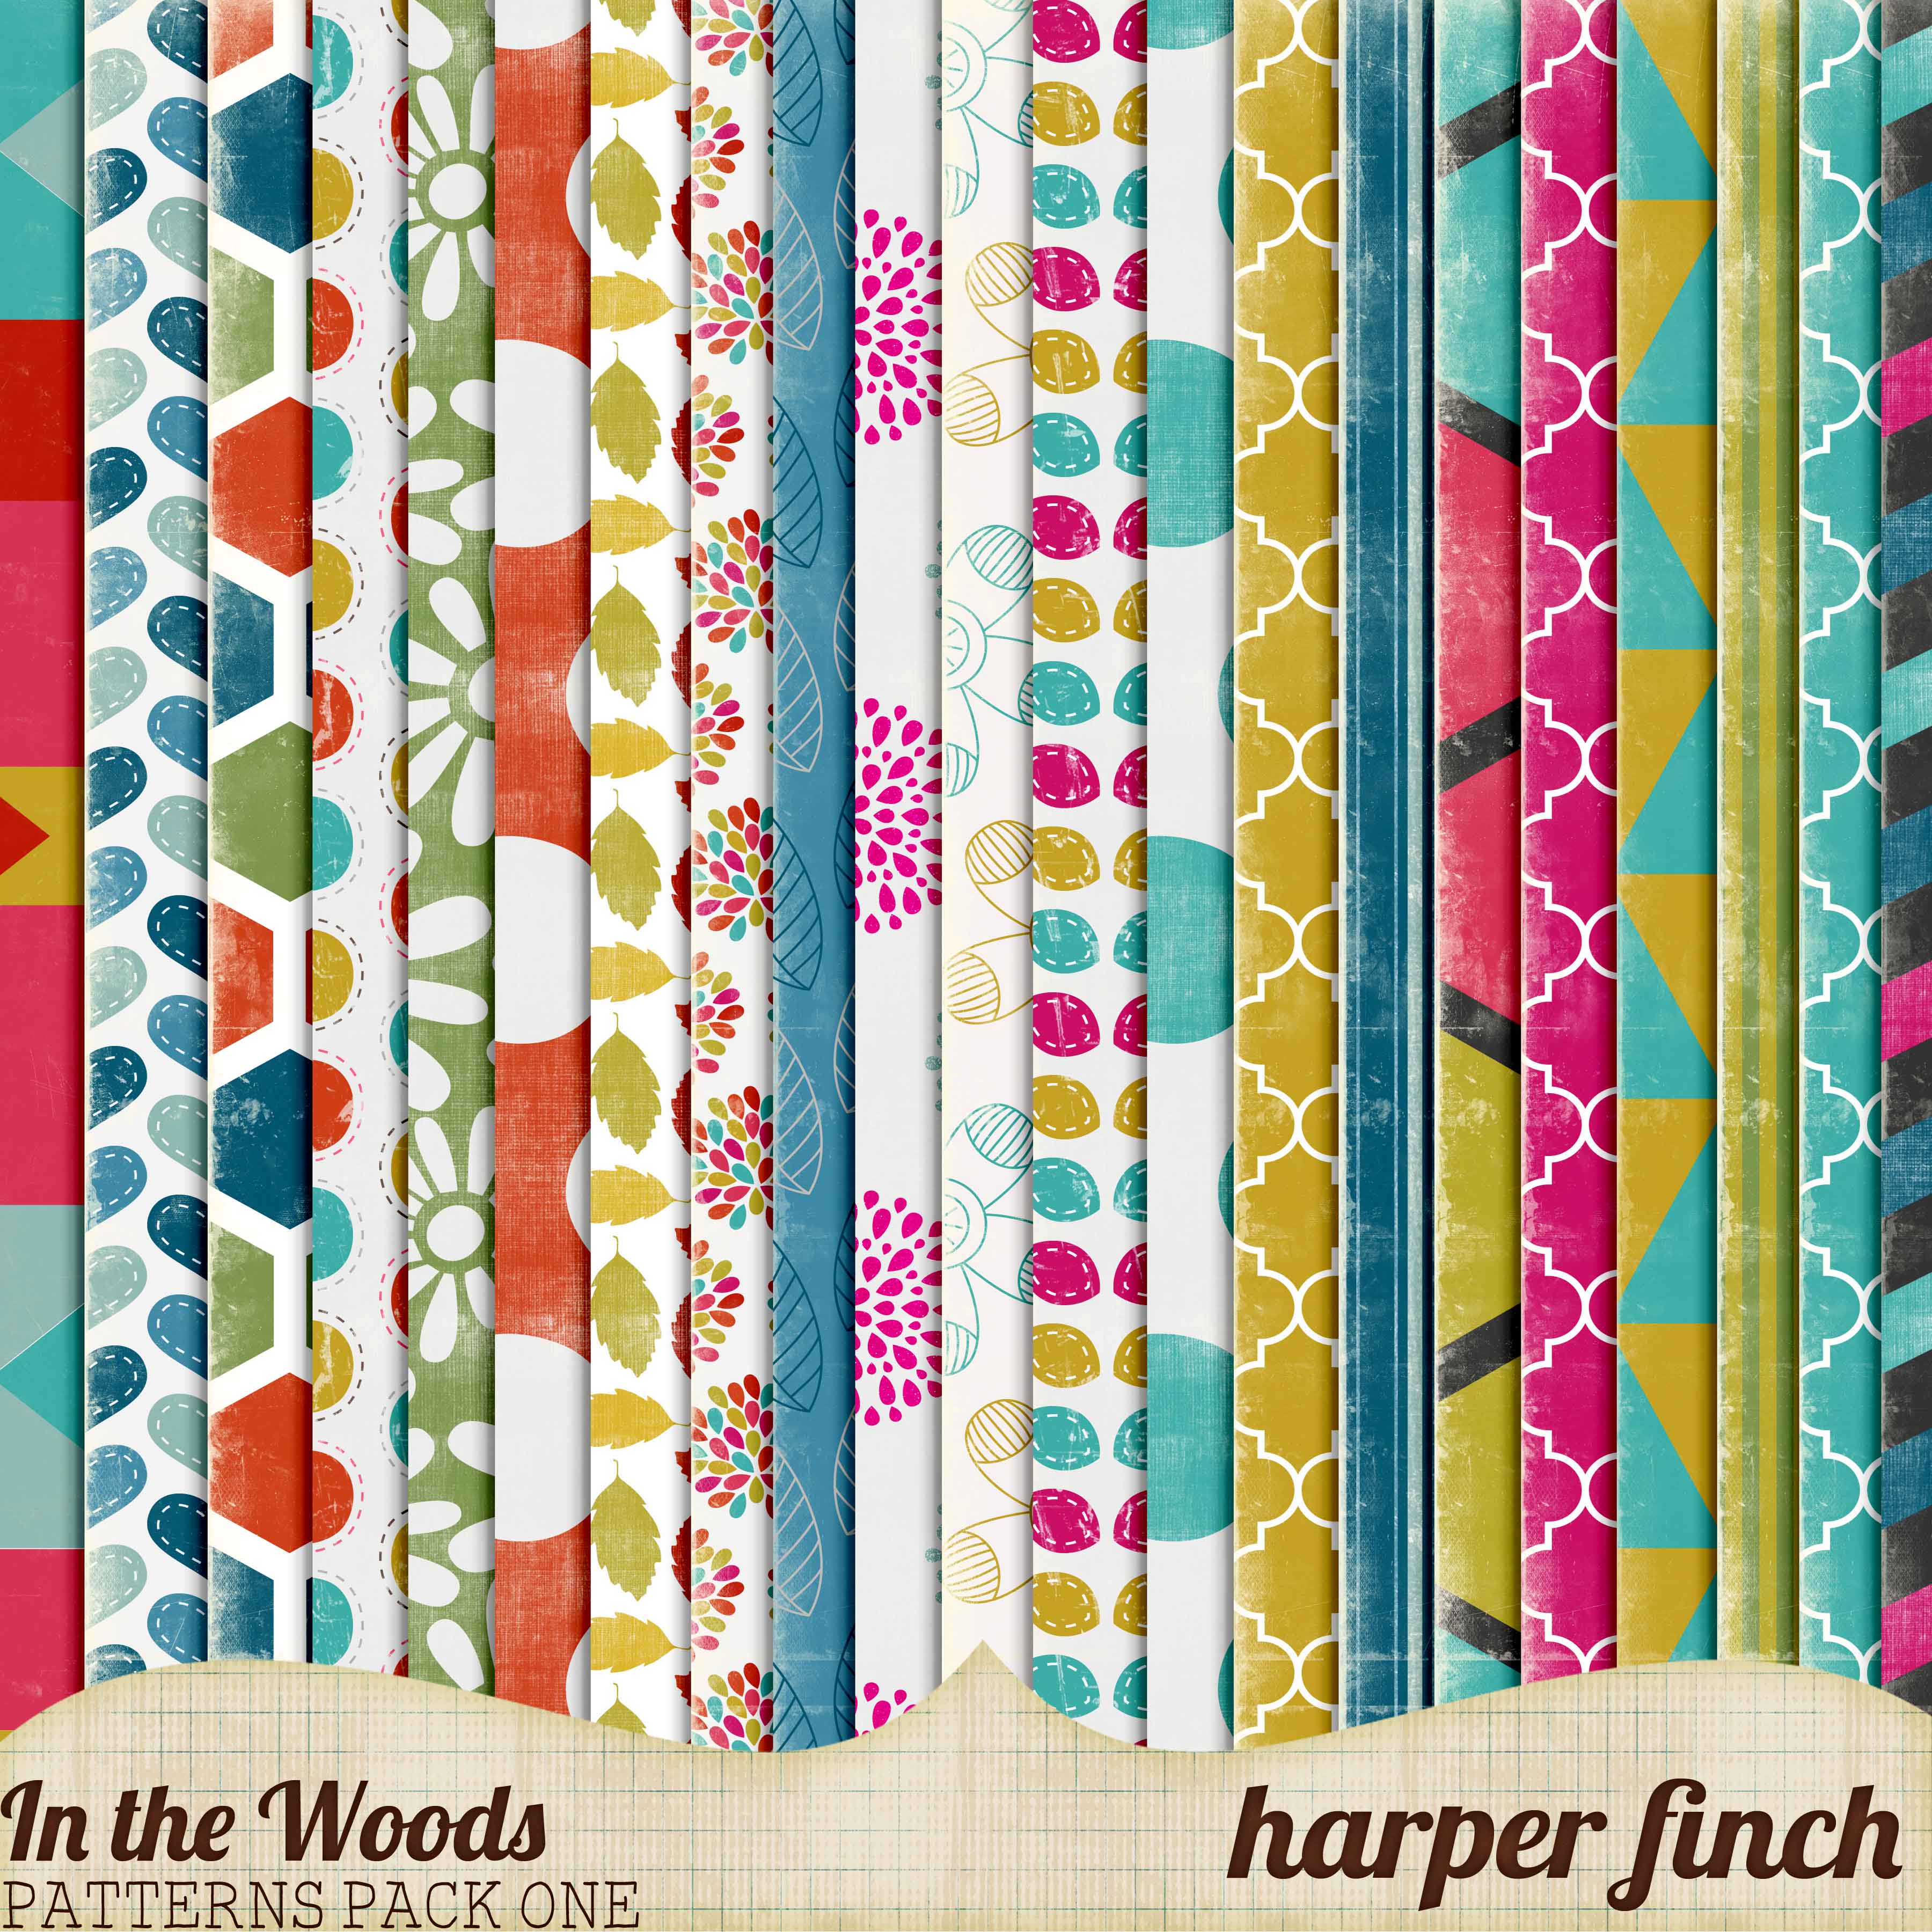 In the Woods Patterns Pack One by Harper Finch